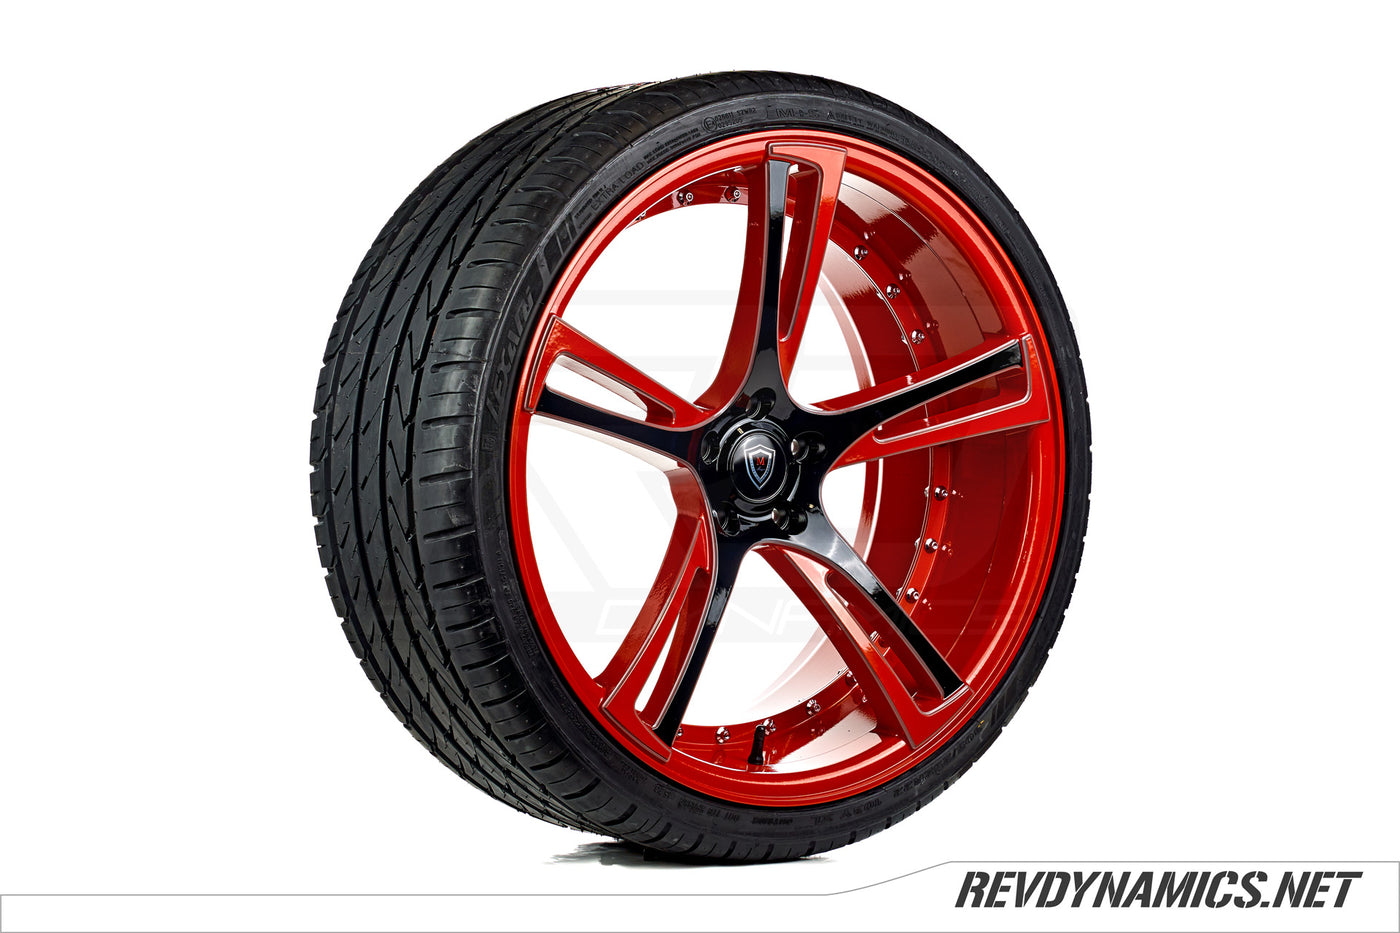 Marquee M3247 22" Rim Powdercoated Red Pearl, Black, and Ghost Gray Polaris Slingshot colors 